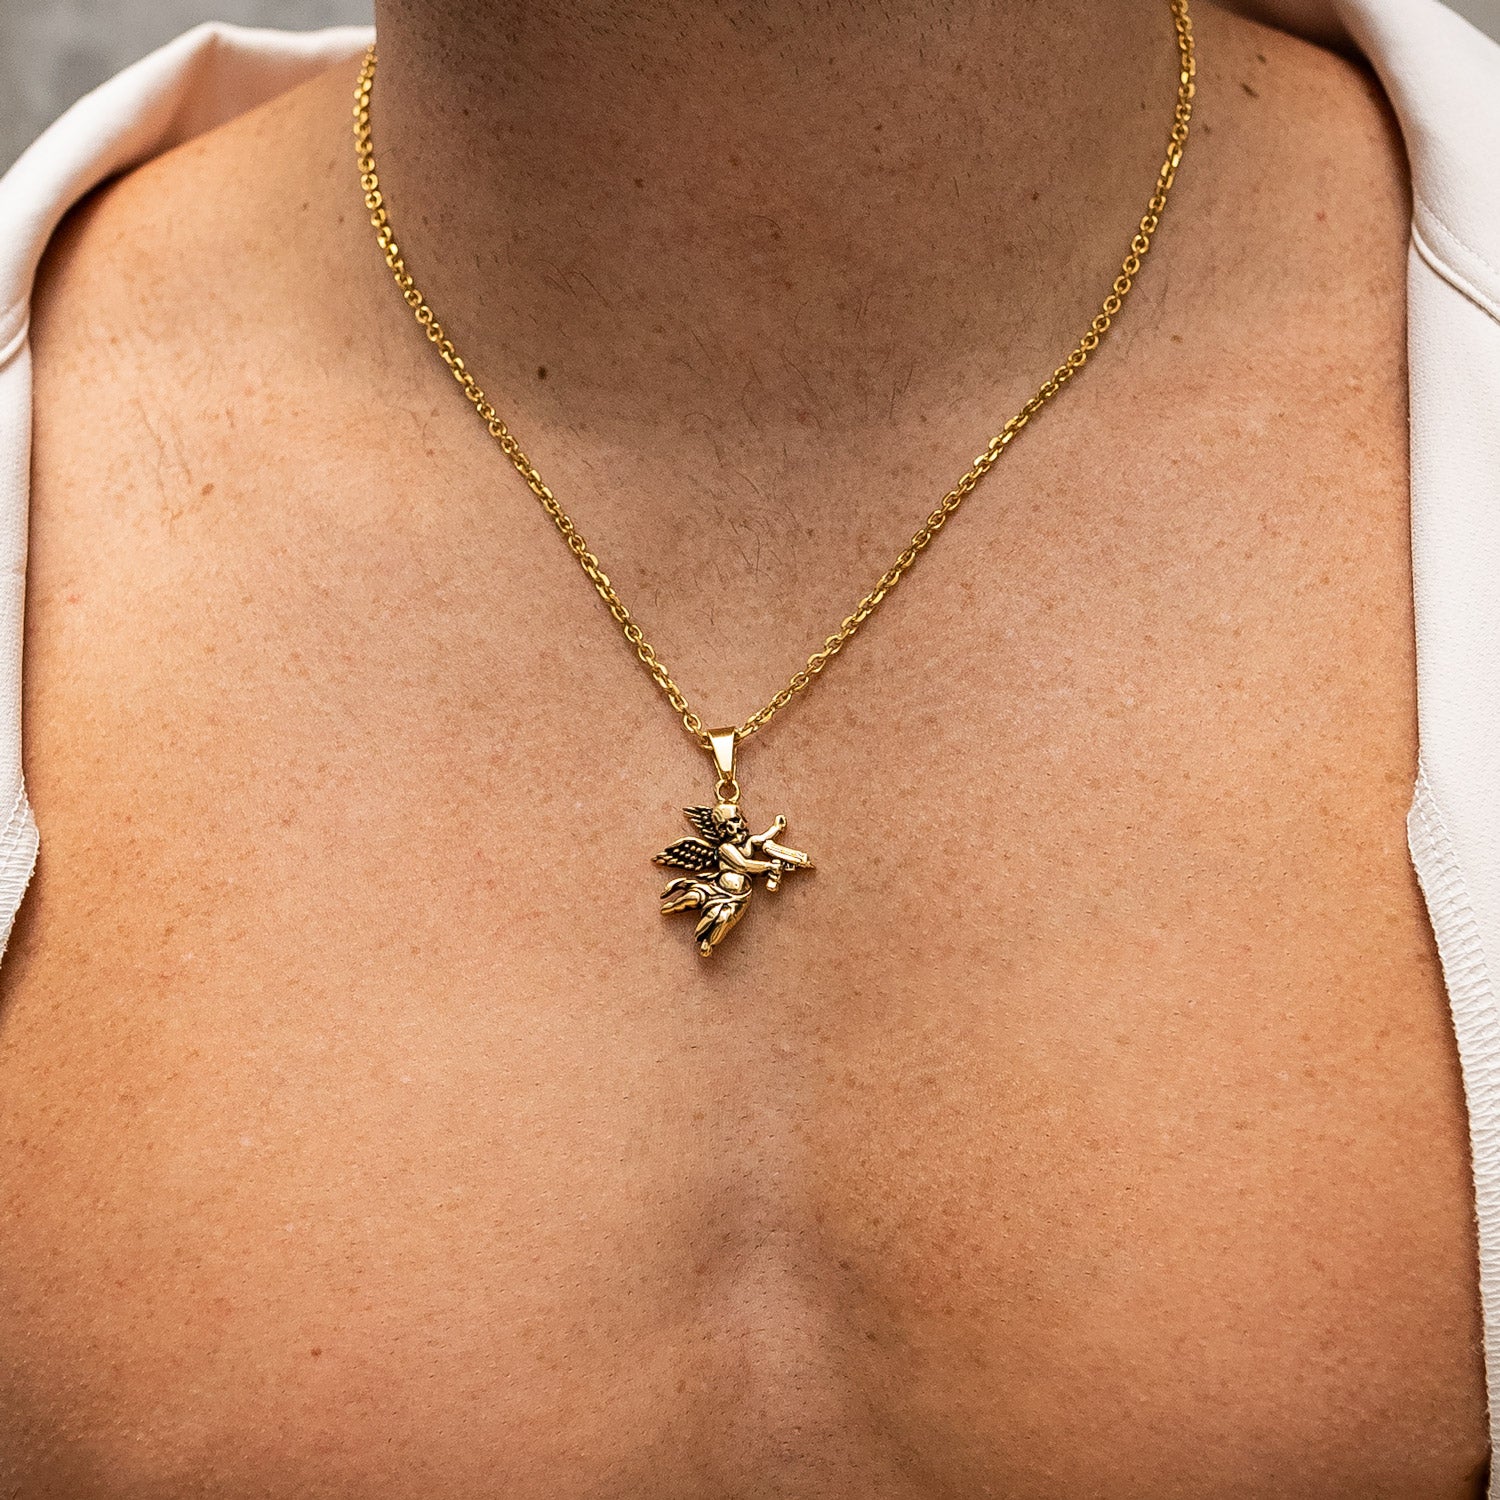 Gold cupid pendant chain on male model